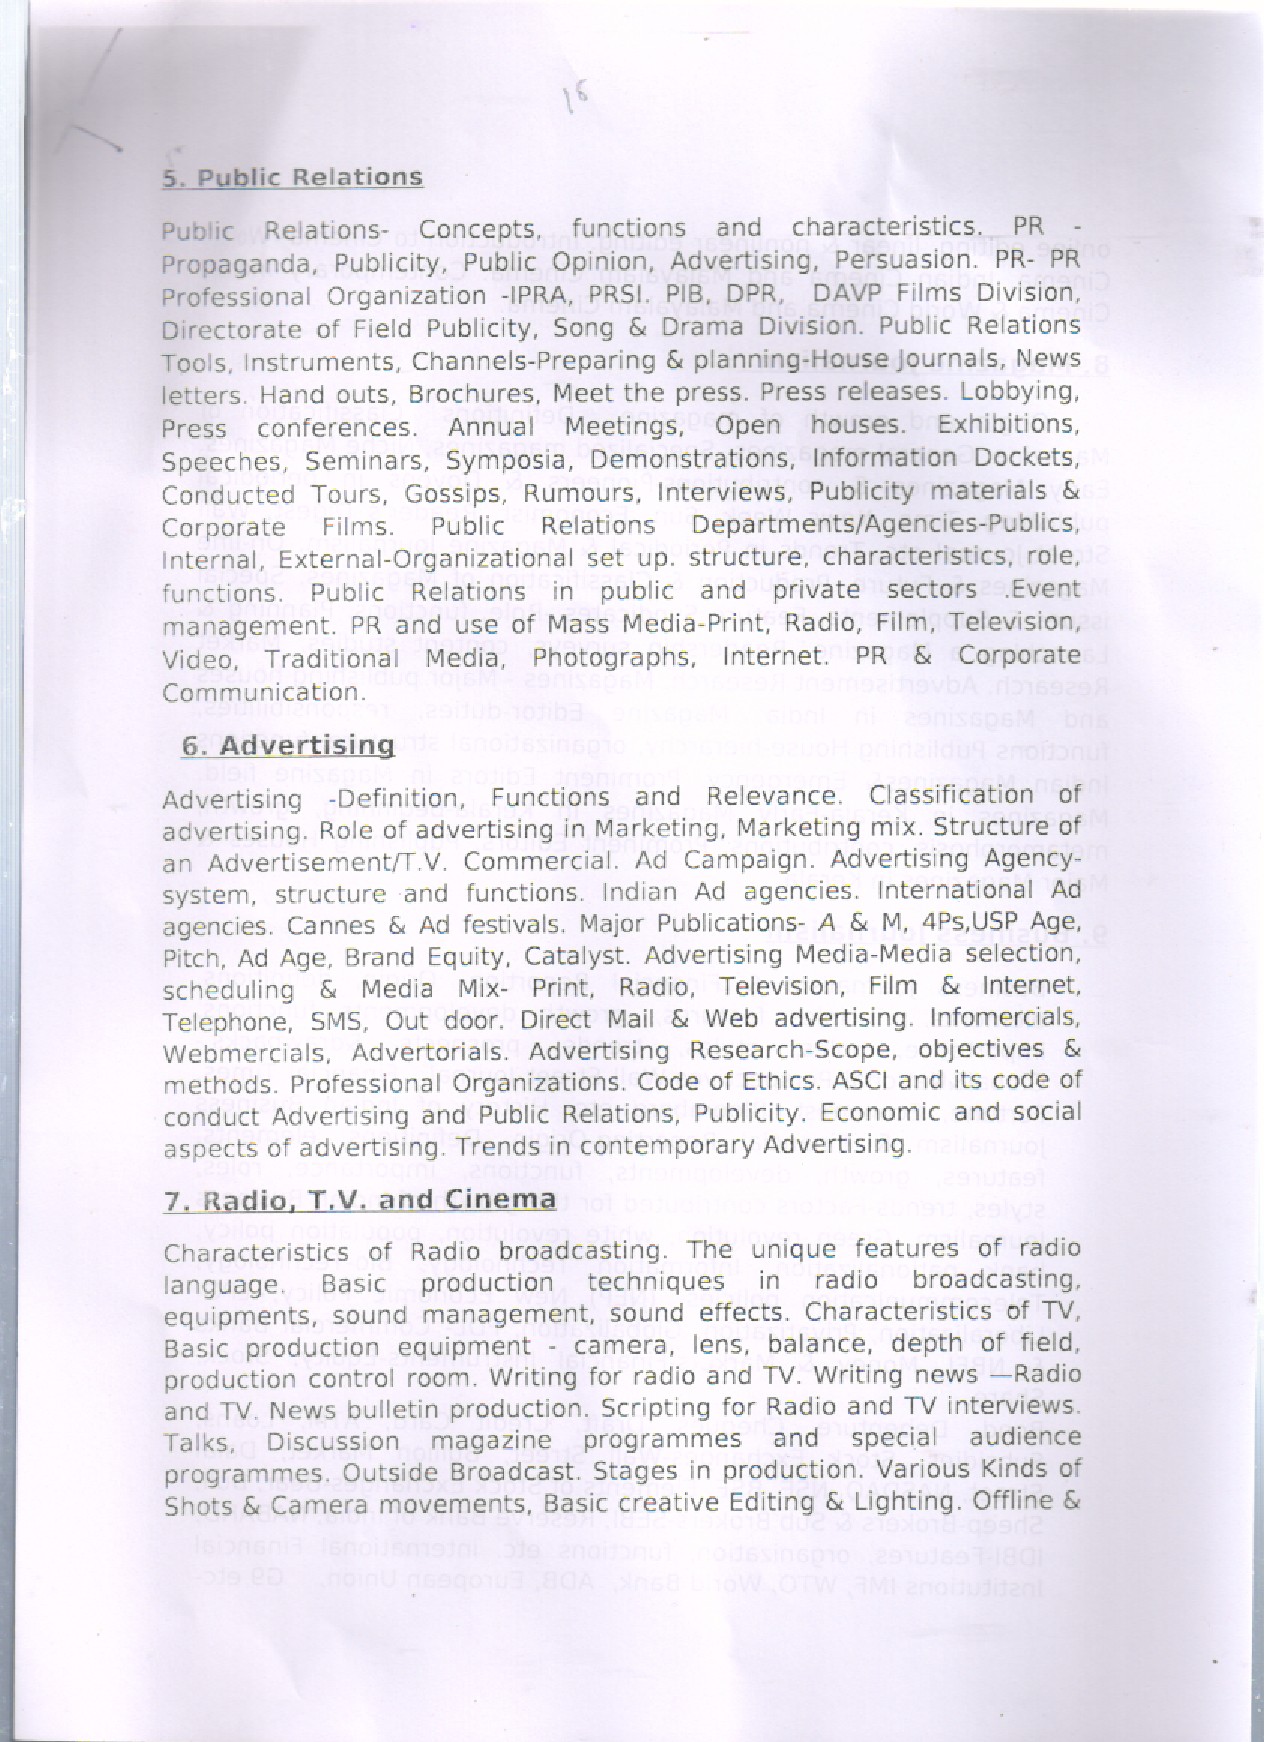 KPSC Syllabus For Assistant Information Officer - Notification Image 3